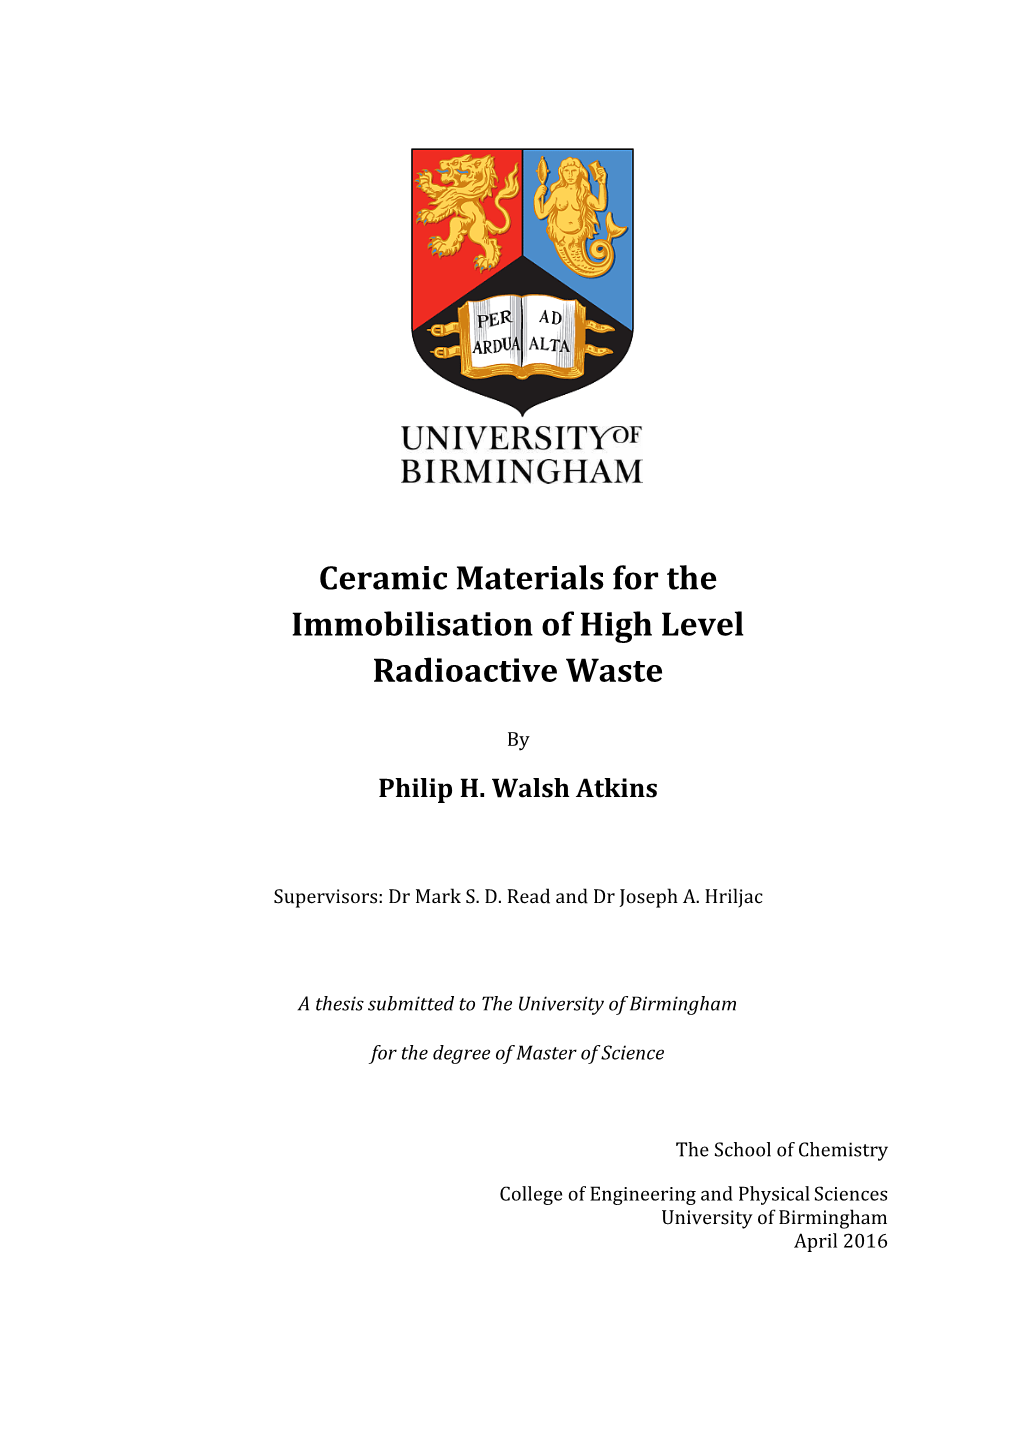 Ceramic Materials for the Immobilisation of High Level Radioactive Waste